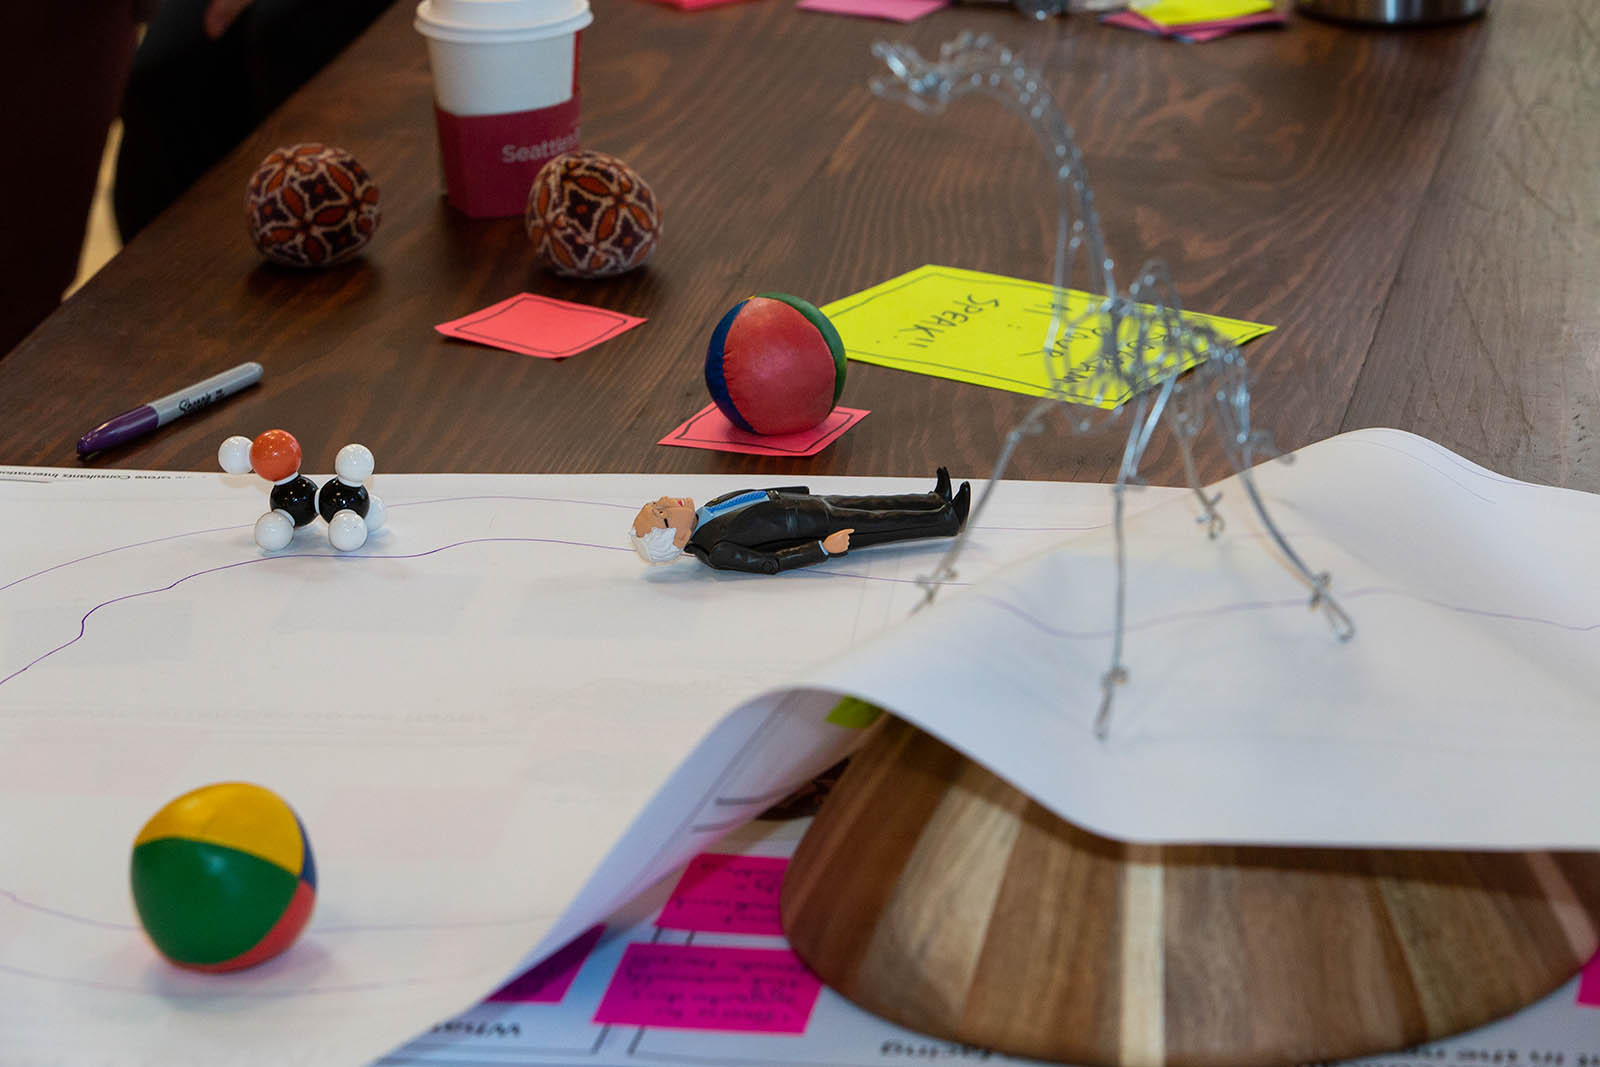 Learning and computing together. In one design group, attendees envisioned a game that was both virtual and tangible, allowing for cross-setting – and cross-generational – collaboration and problem-solving.